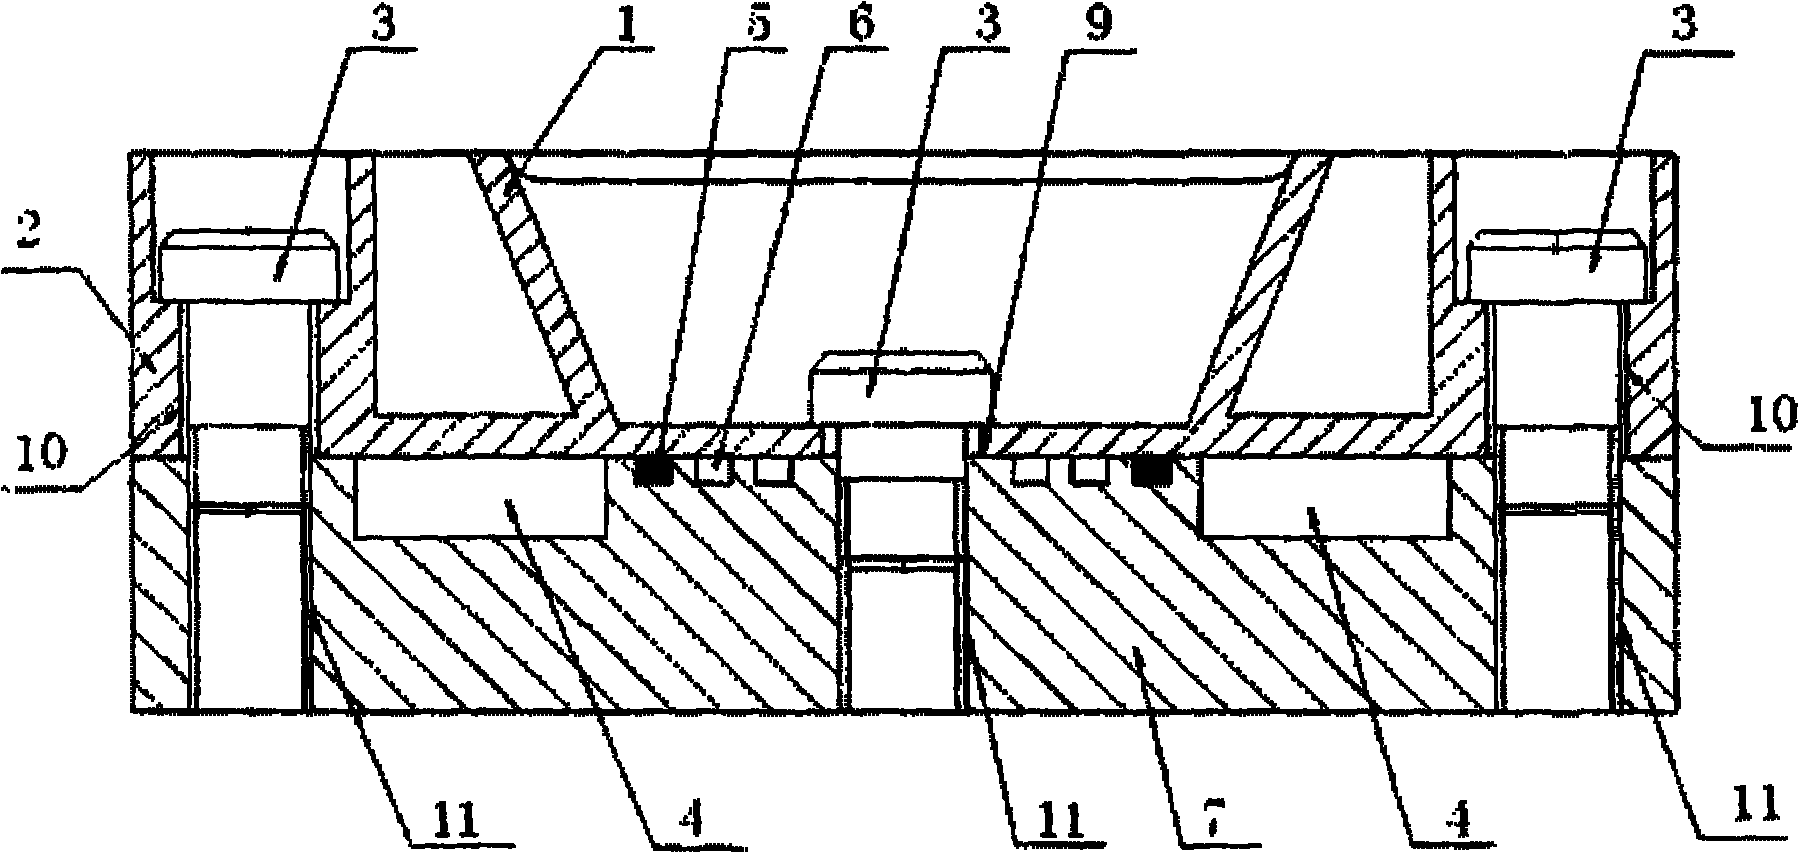 Numerical control machining clamping method for aircraft wing beam parts